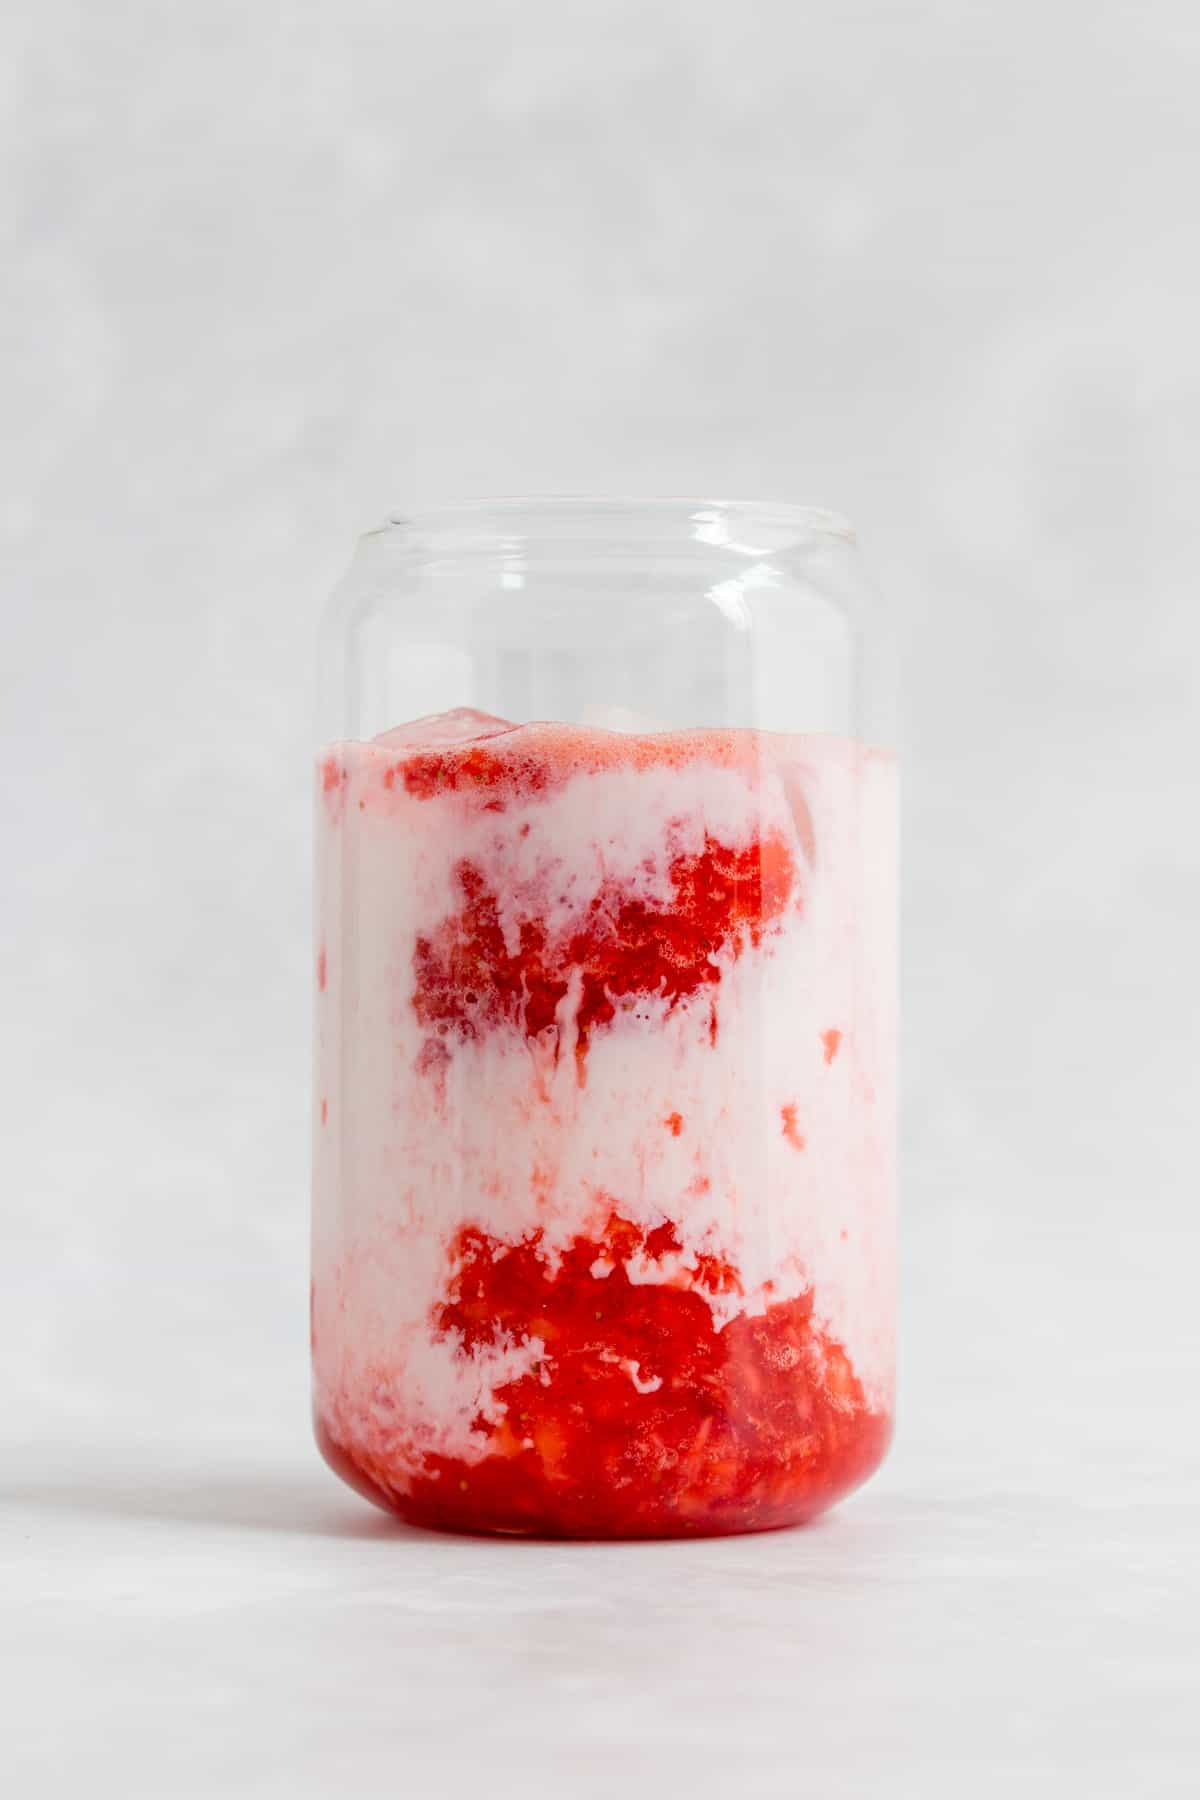 Milk added to the glass of strawberry puree.